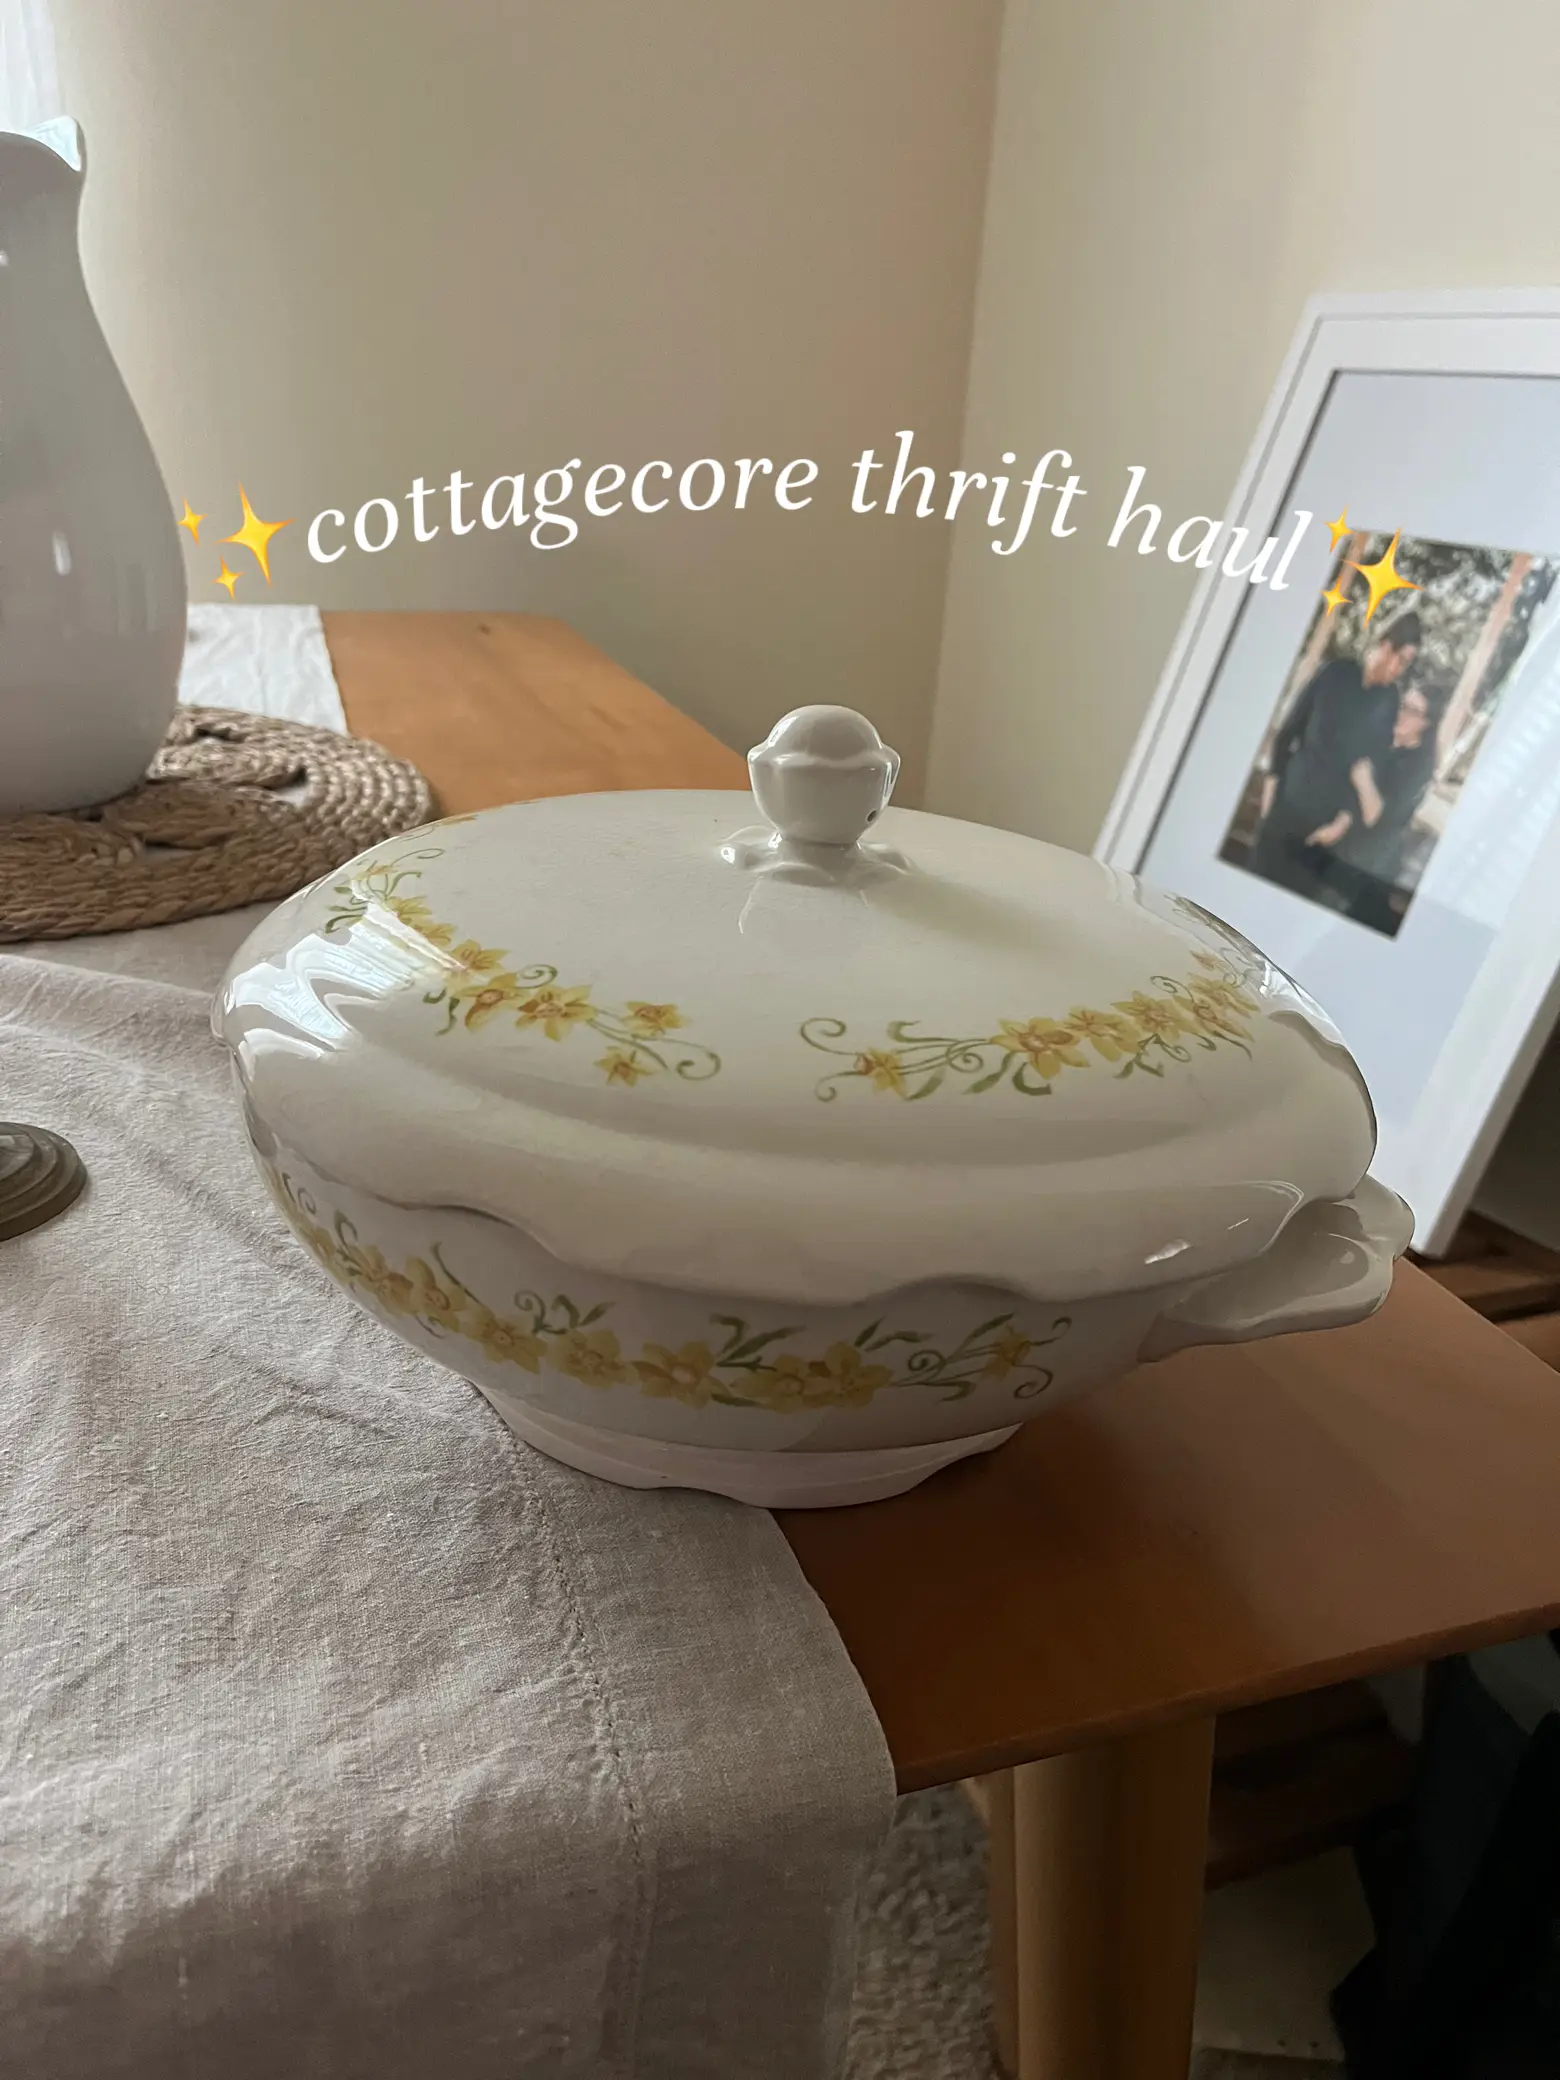 How to Thrift: Coquette Style Decor 🎀, Gallery posted by Camille